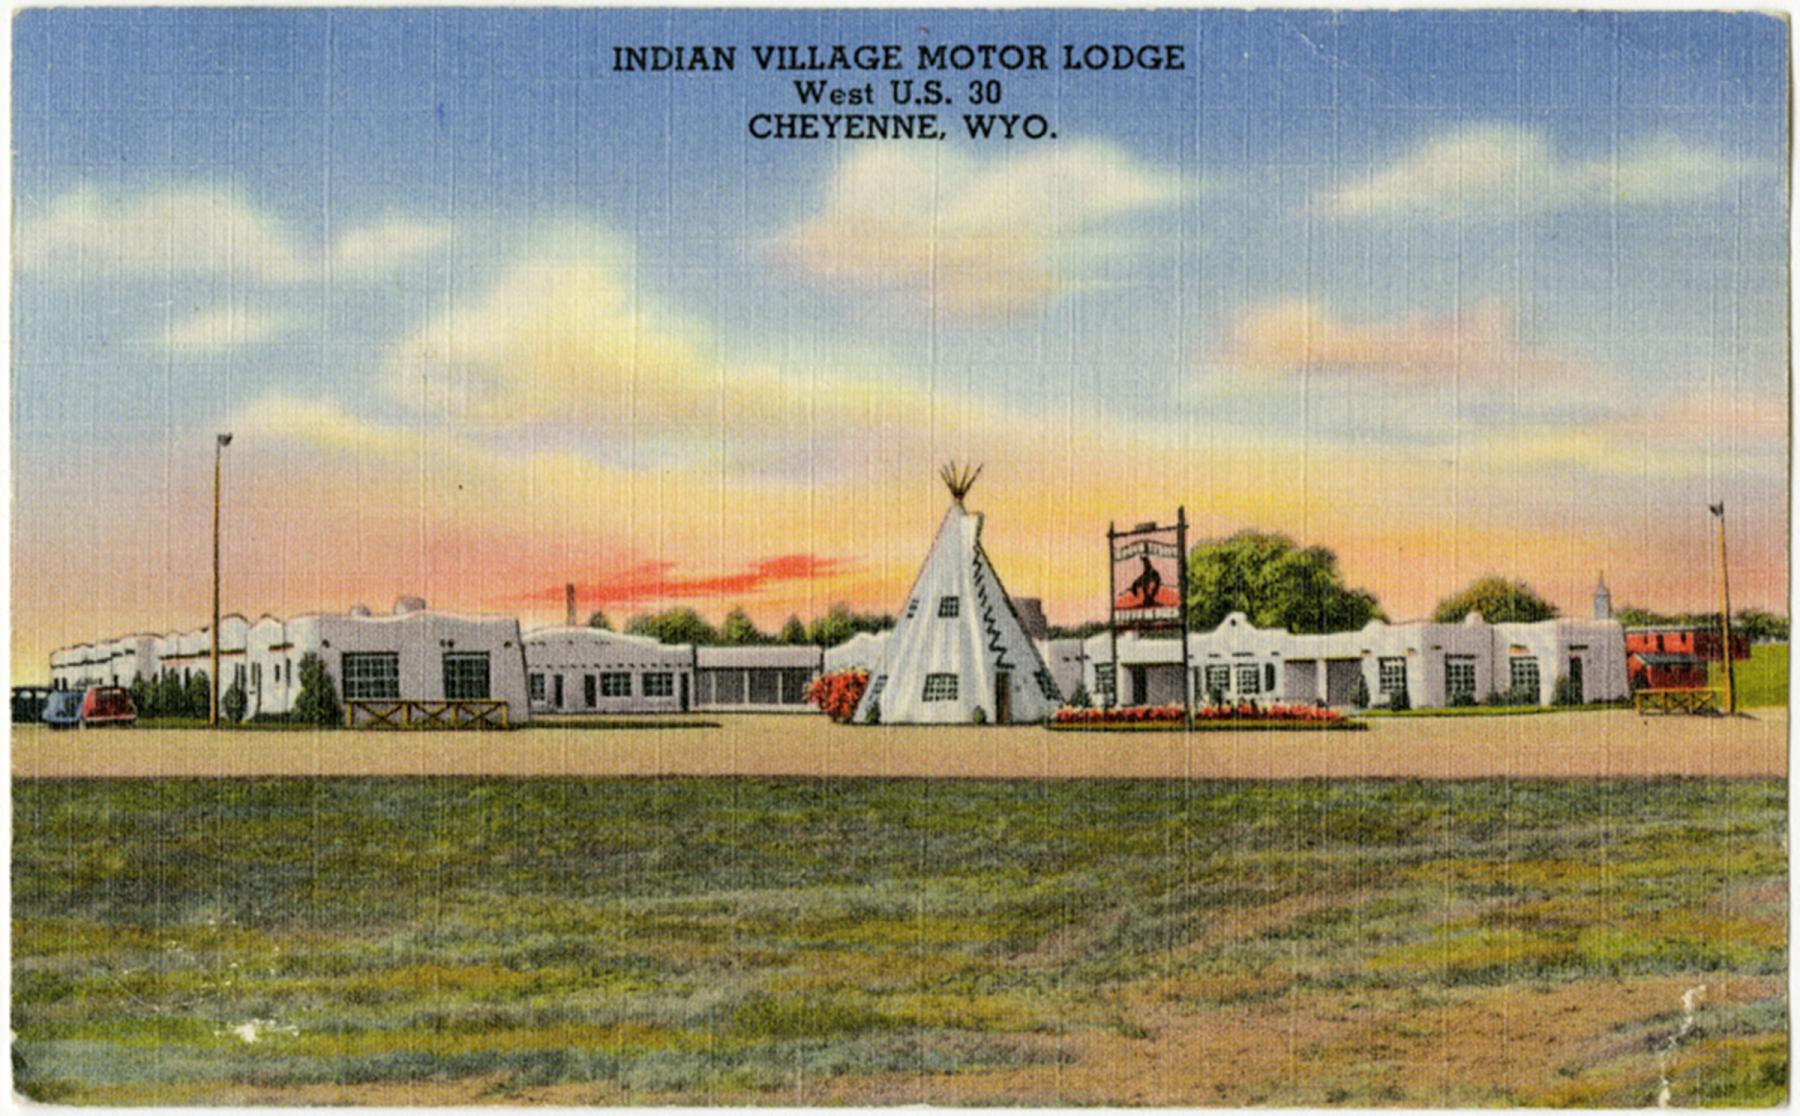 Postcards were sold in places where we still find them today: motels, hotels, gas stations and trinket and t-shirt shops. Wyoming State Archives.